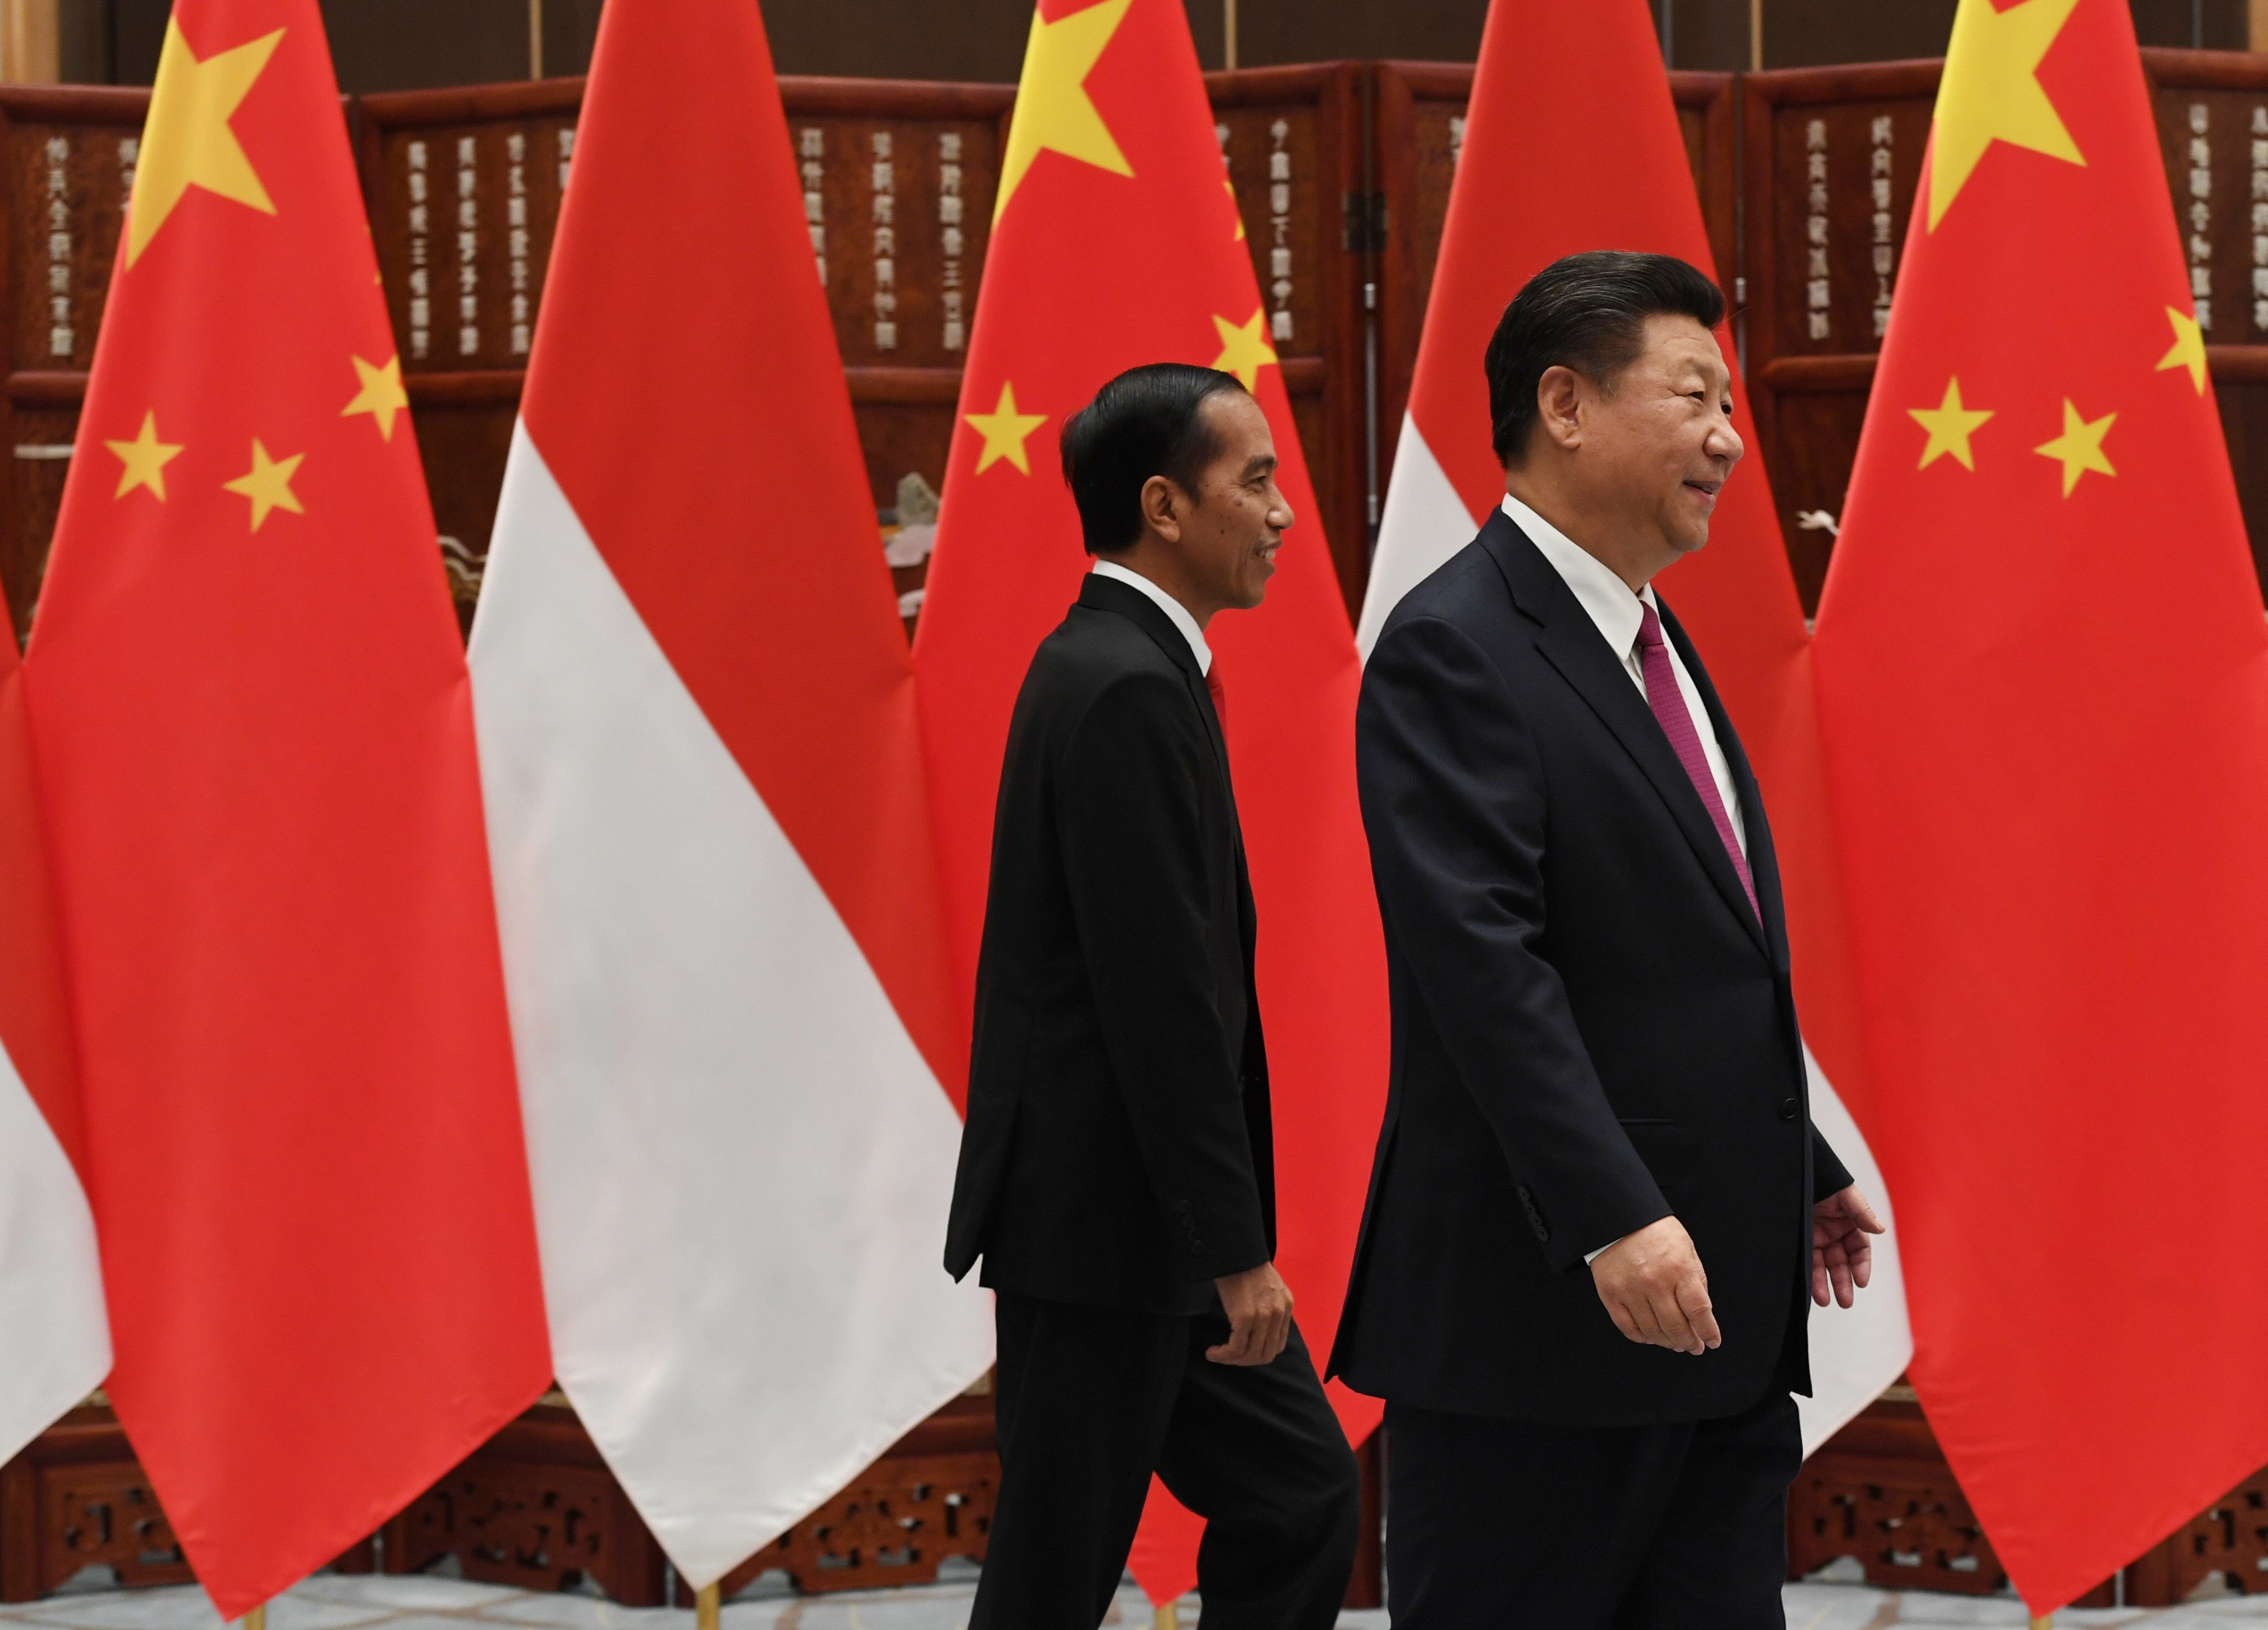 Chinese President Xi Jinping and Indonesian President Joko Widodo walk together at a meeting in 2016. Photo: AP